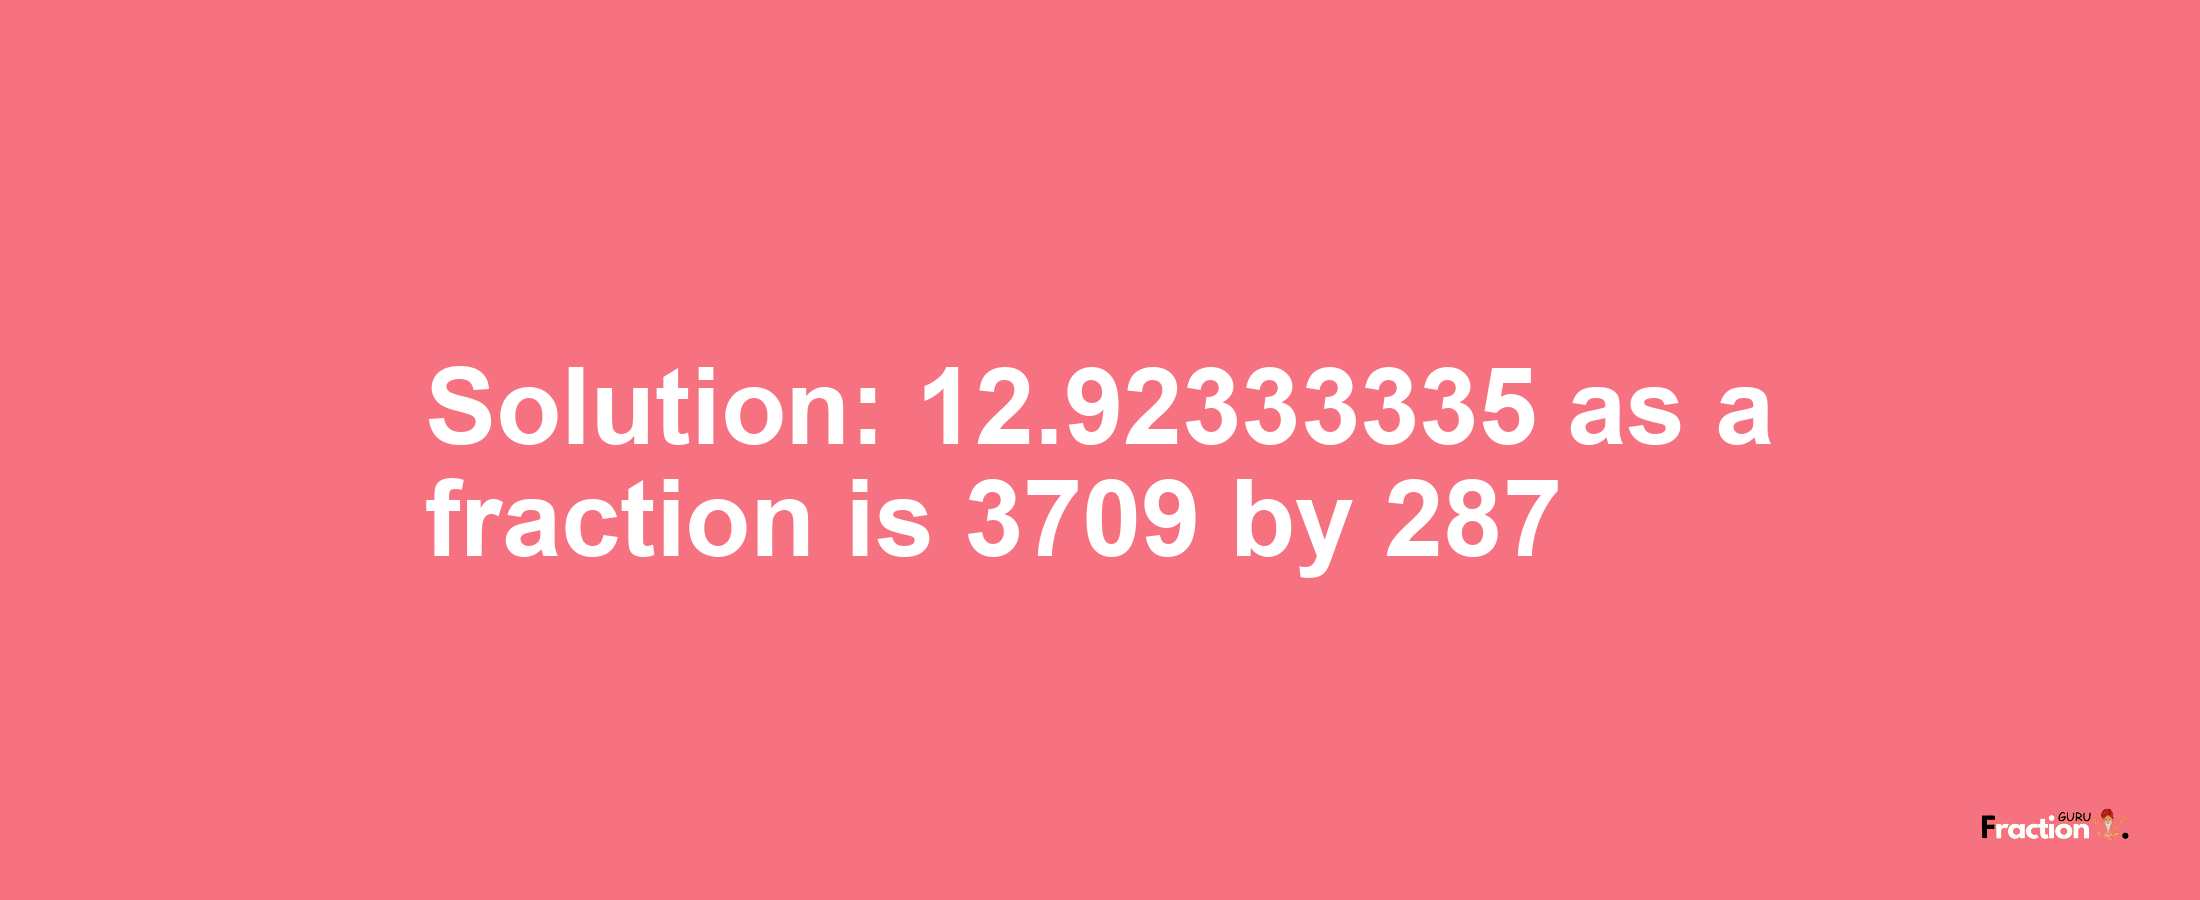 Solution:12.92333335 as a fraction is 3709/287